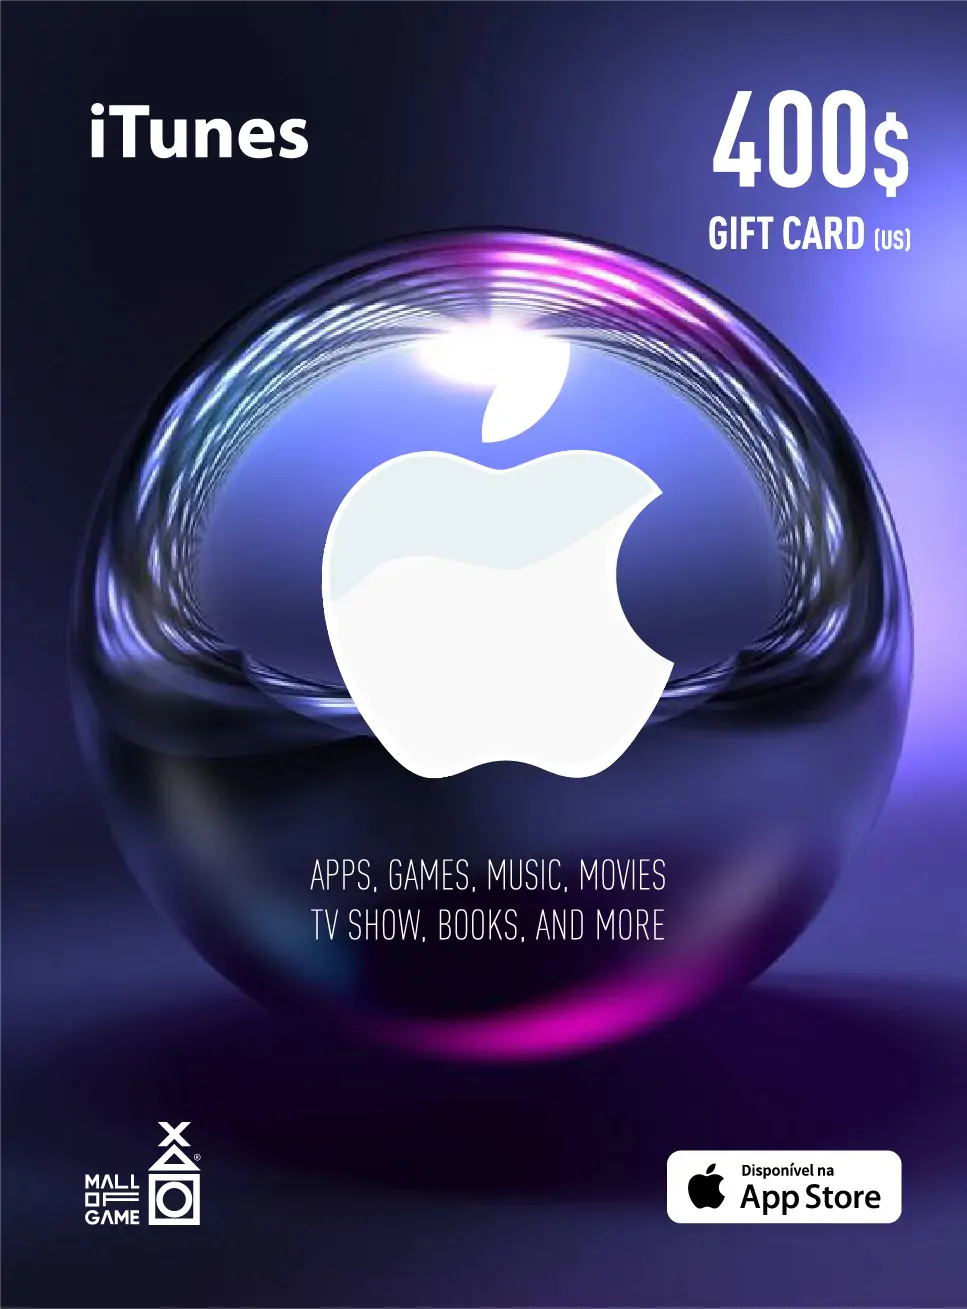 iTunes Gift Card - US$ 400